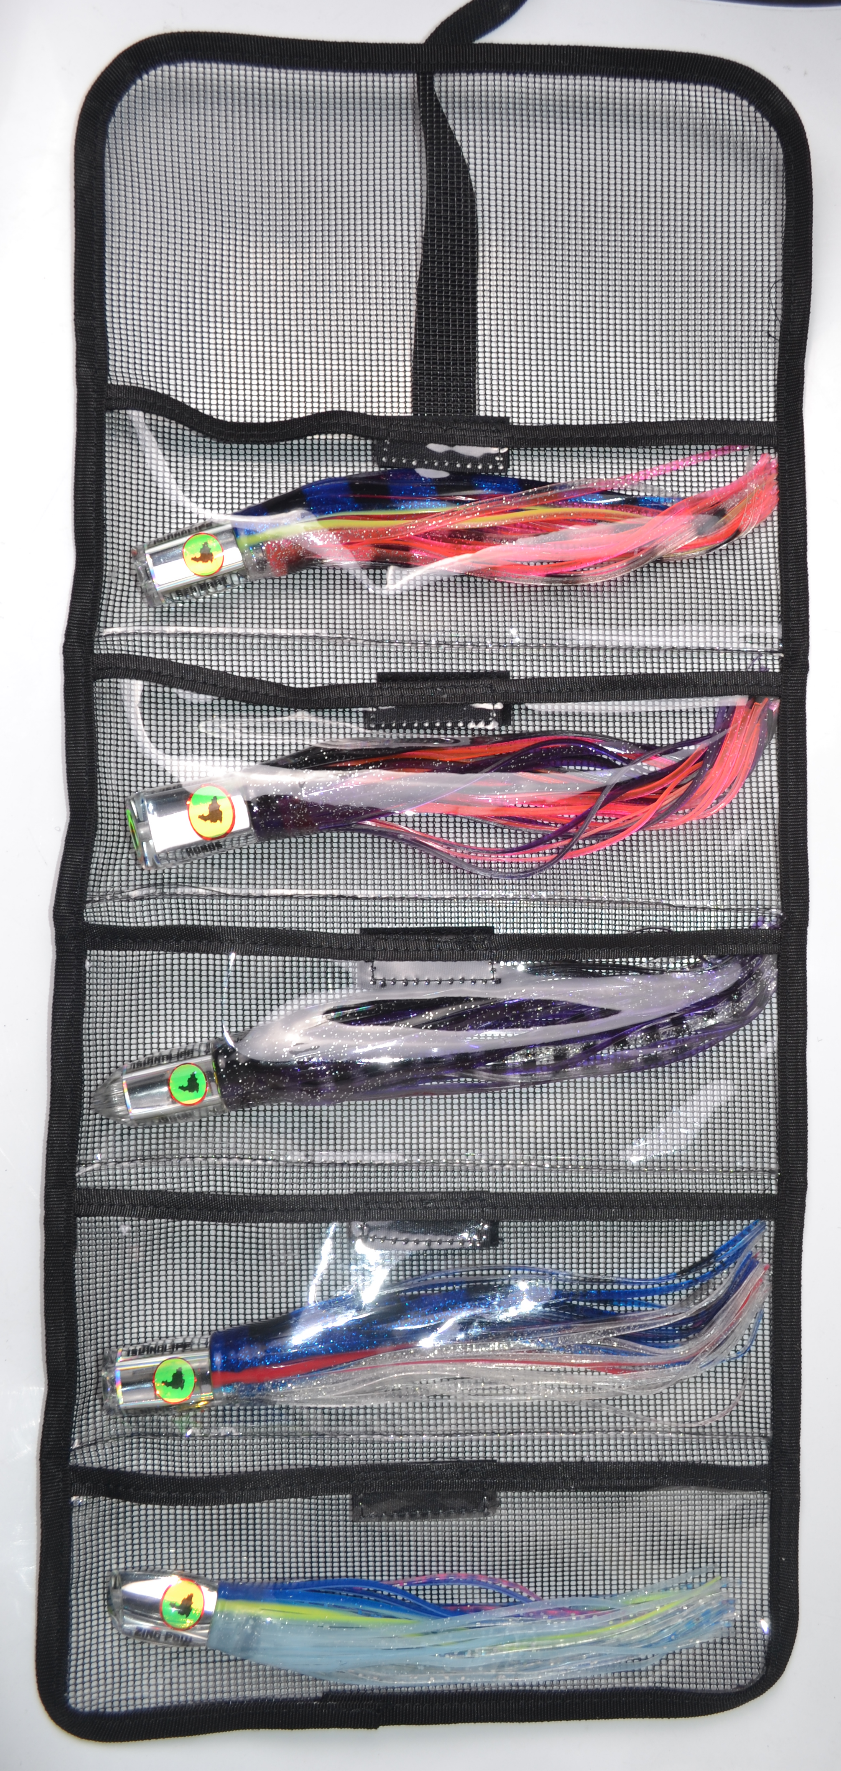 https://www.islandlifelures.com/wp-content/uploads/2022/06/LURE-BAG-WITH-LURE.png